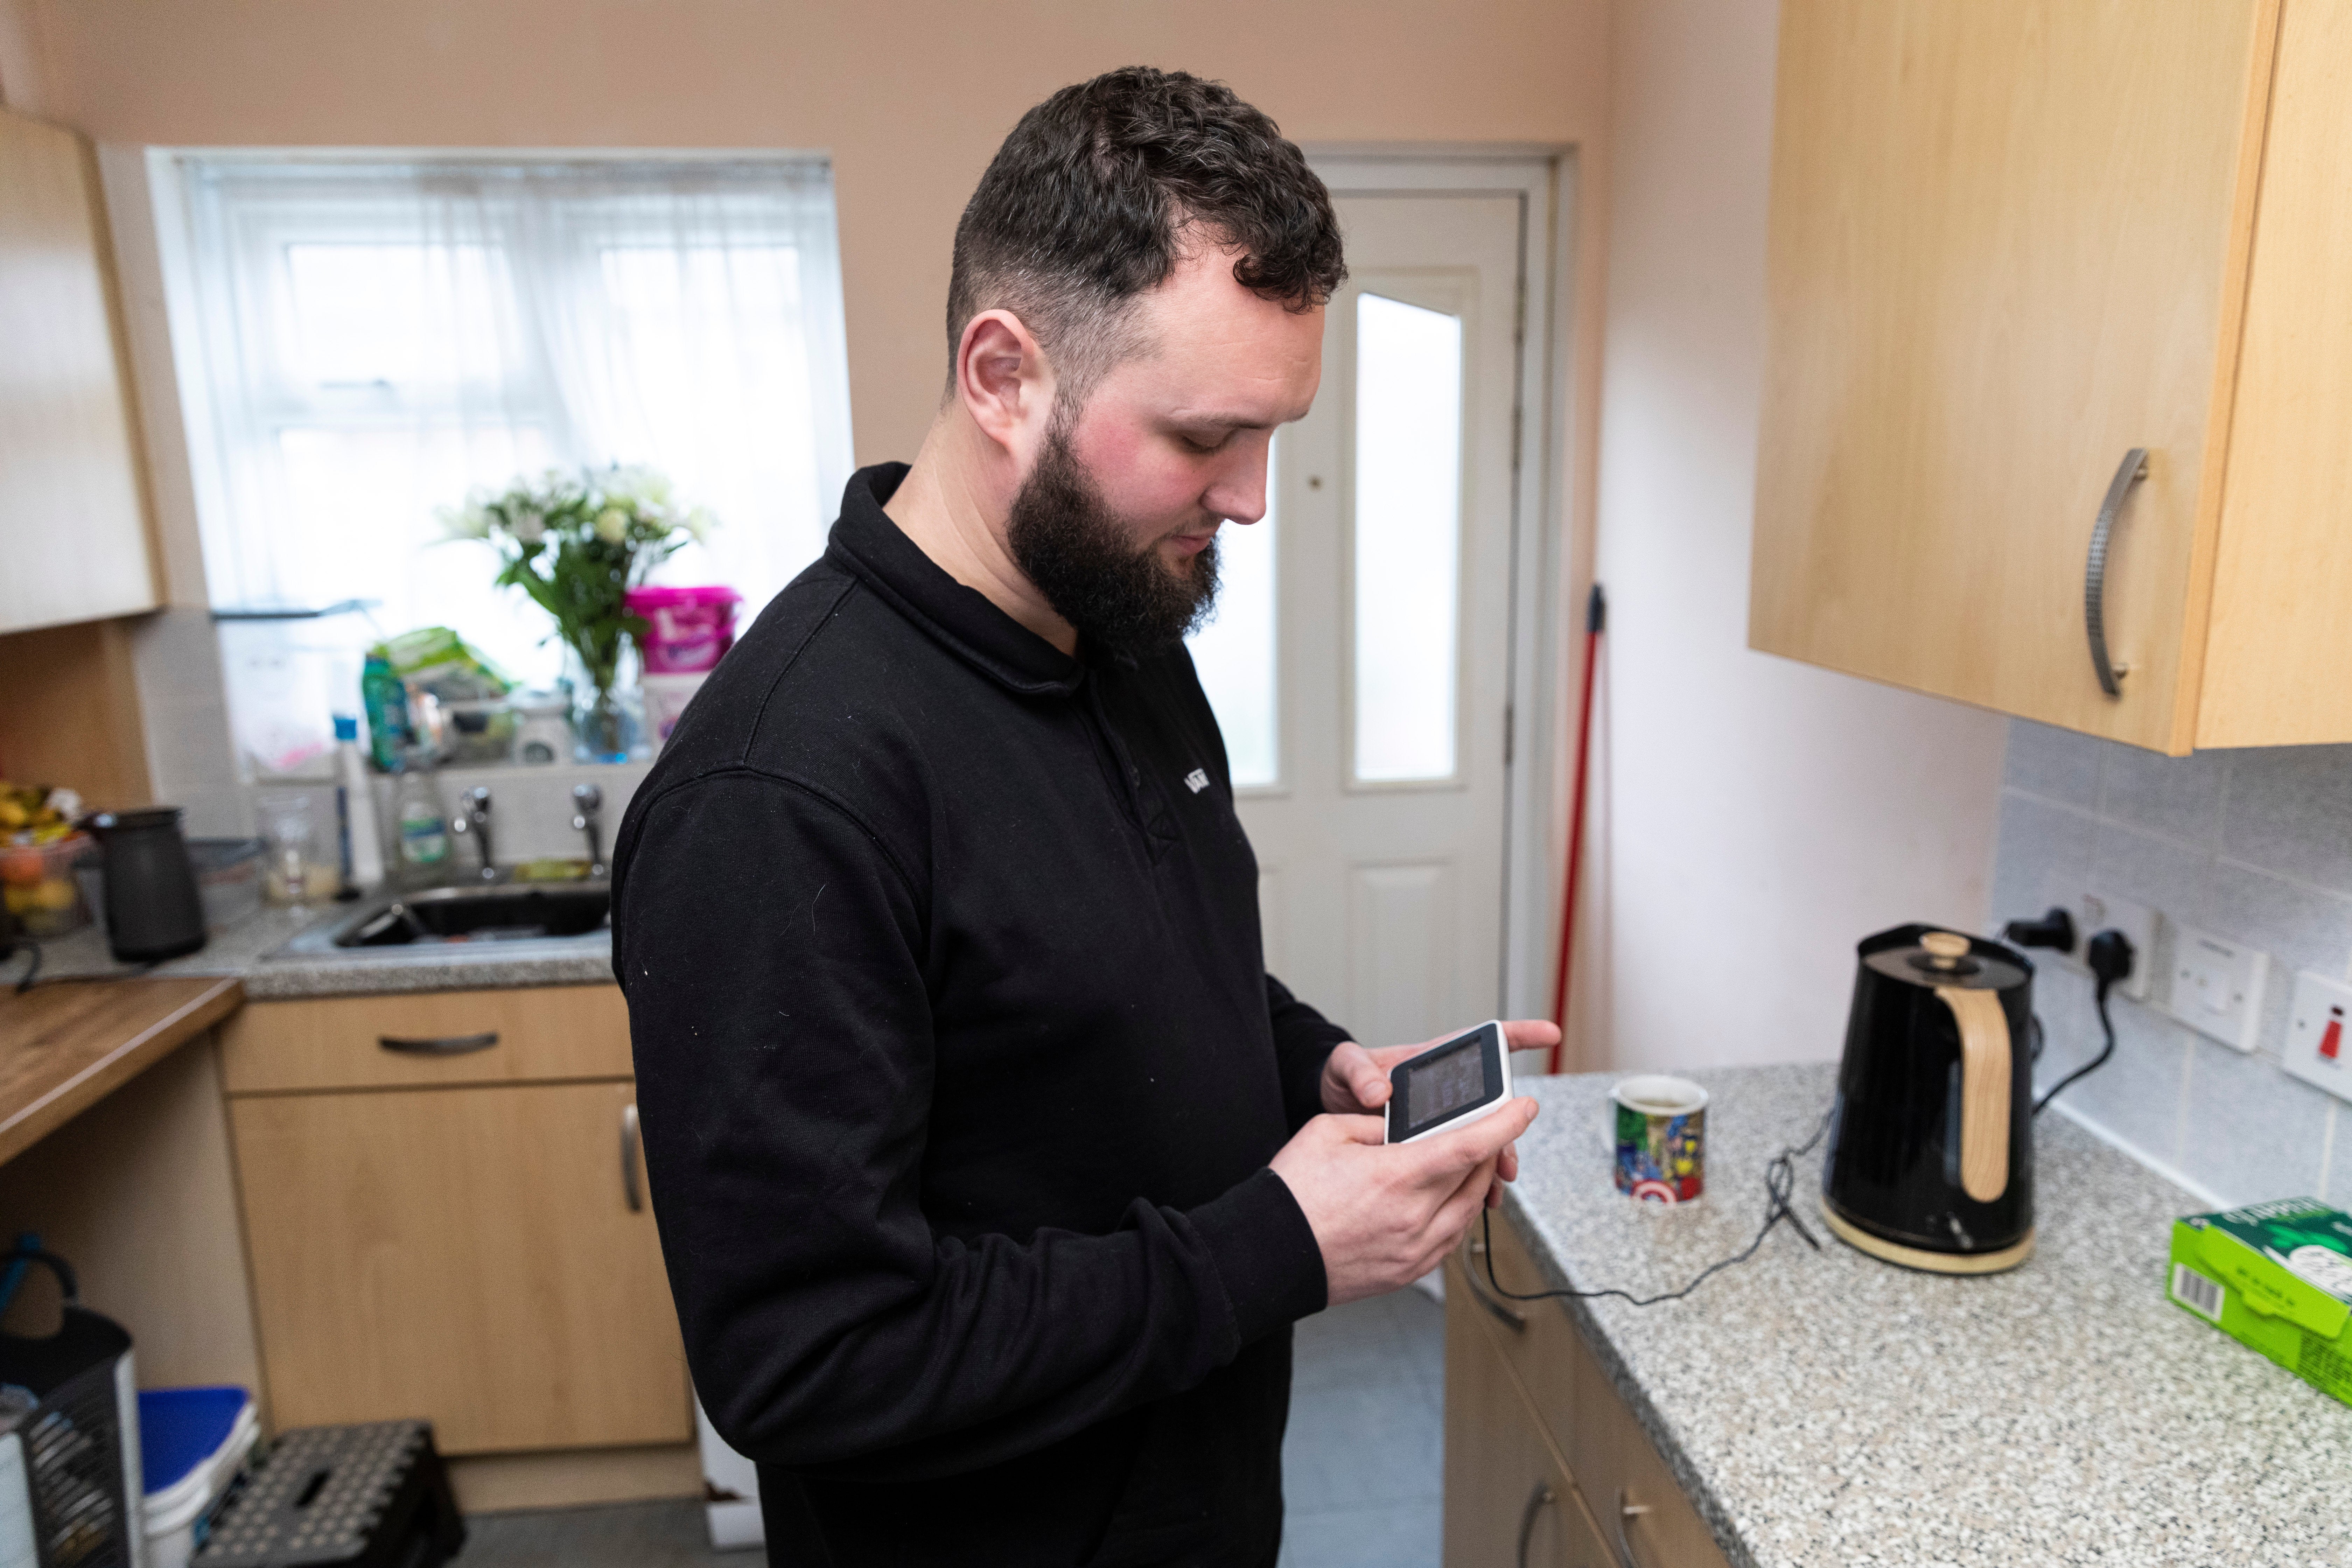 With rising energy costs, checking bills, arranging for payment, and sending meter readings to suppliers is taking up more time for unpaid carers